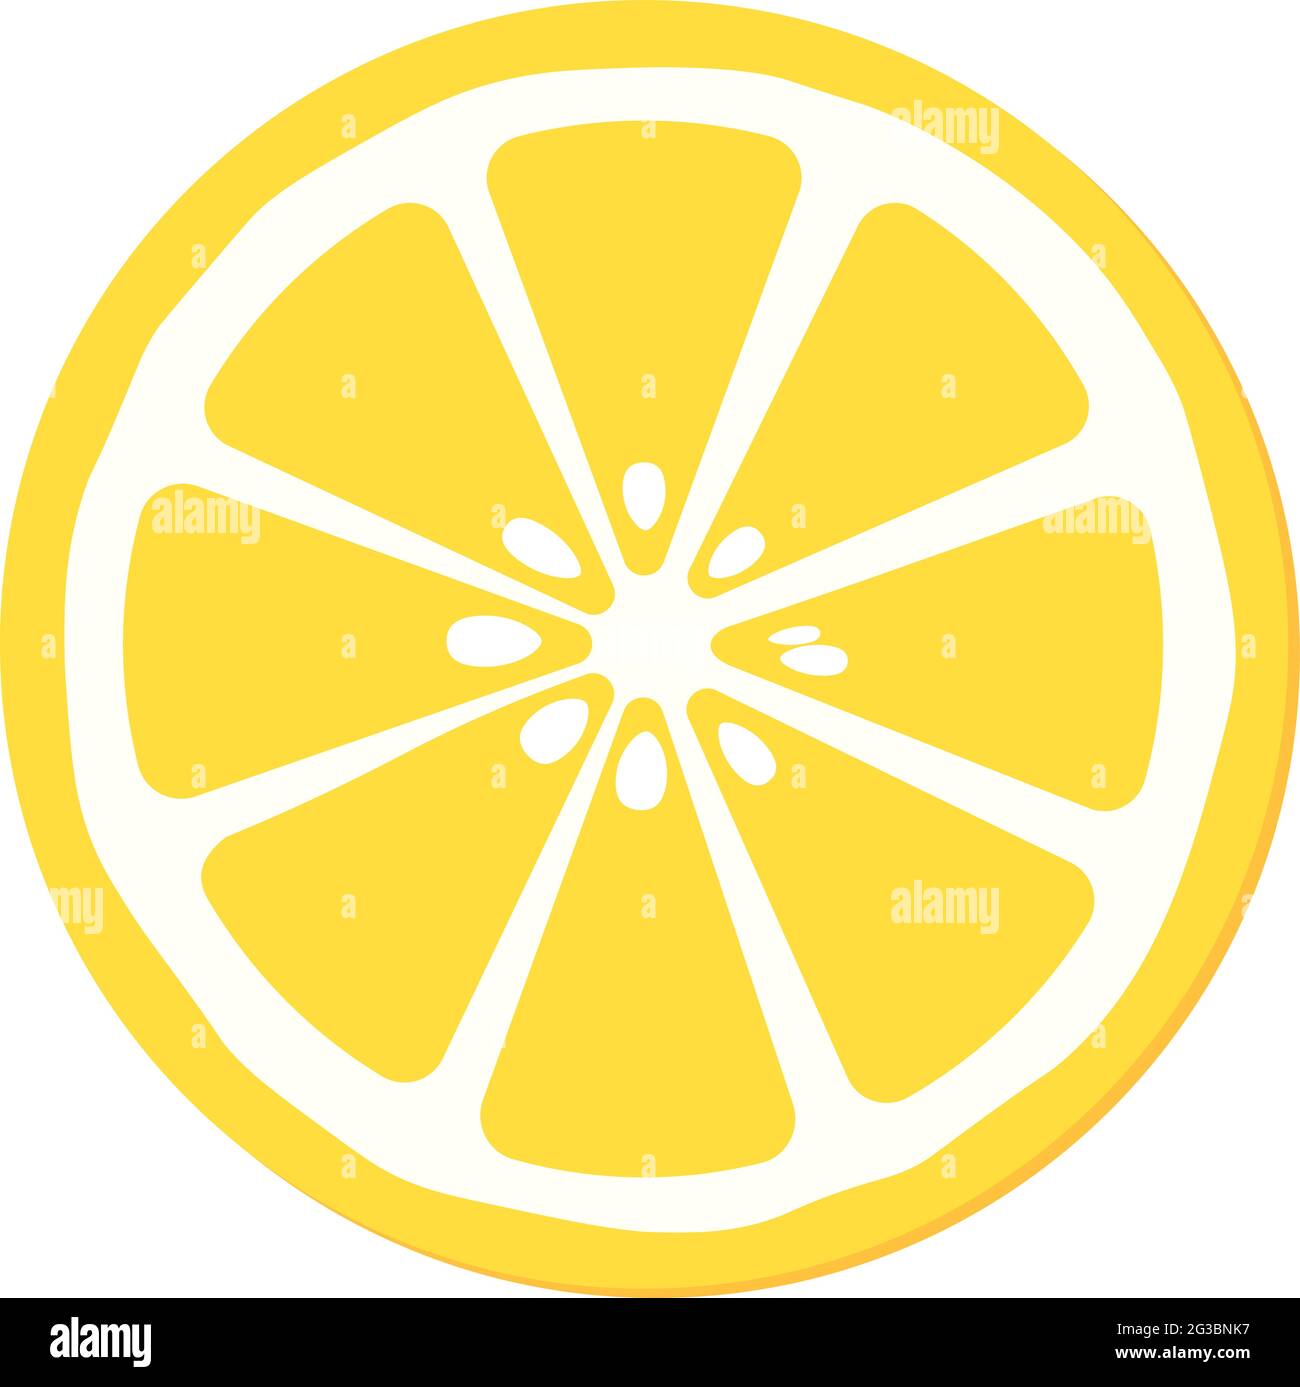 simple yellow and white slice of lemon vector illustration Stock Vector ...